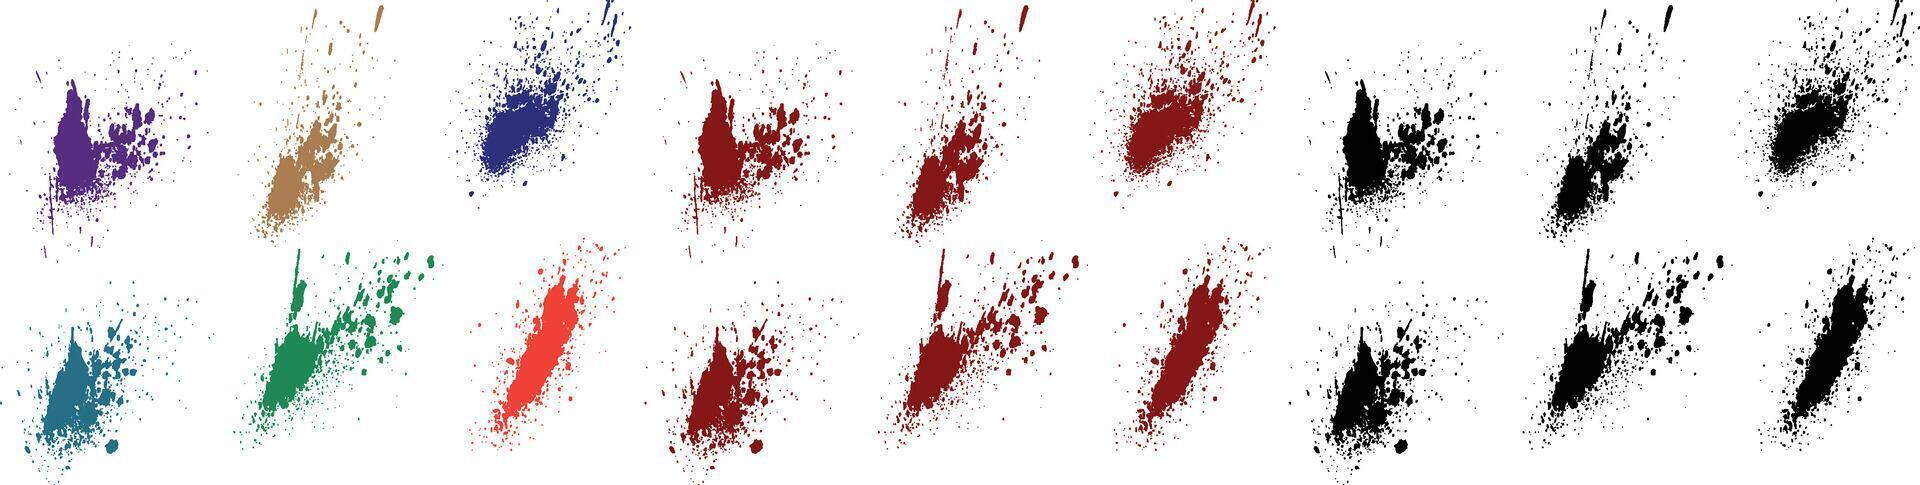 Set of criminals brush stroke texture dripping red, orange, green, purple, wheat, black color blood vector background